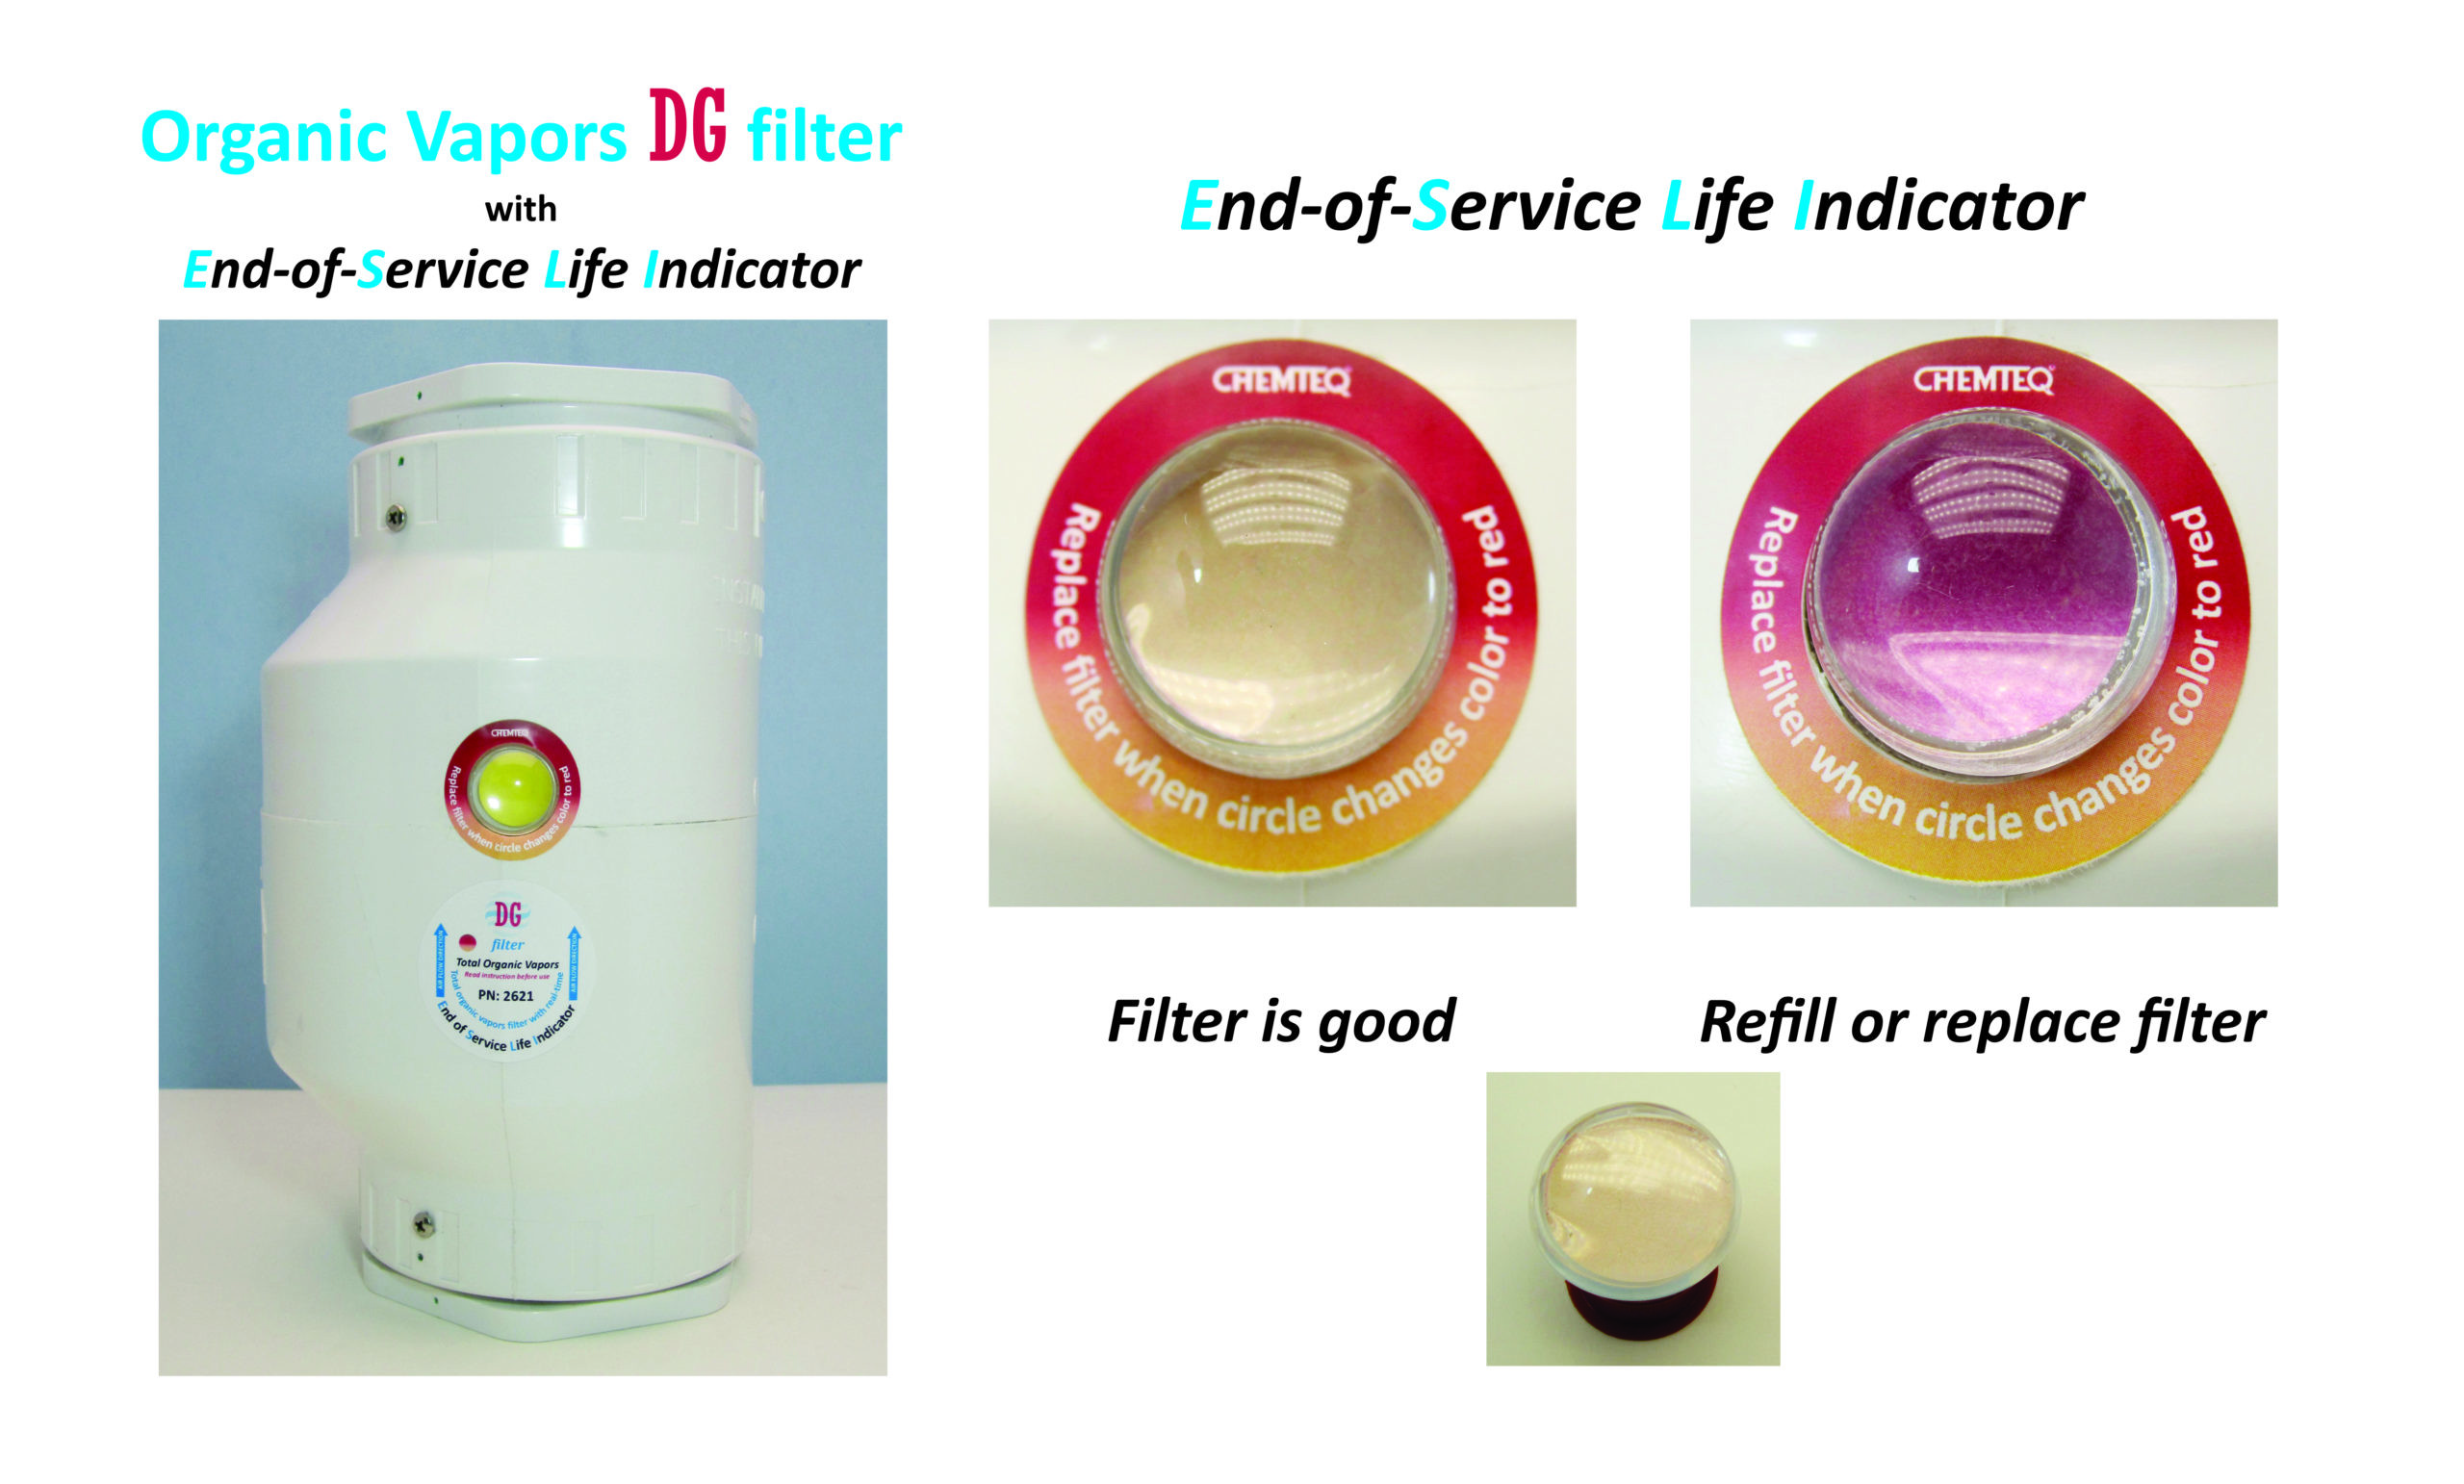 Organic Vapors DG FILTER-ESLI-2621. Filter with end of service life indicator for chemical processes and reactor vents.